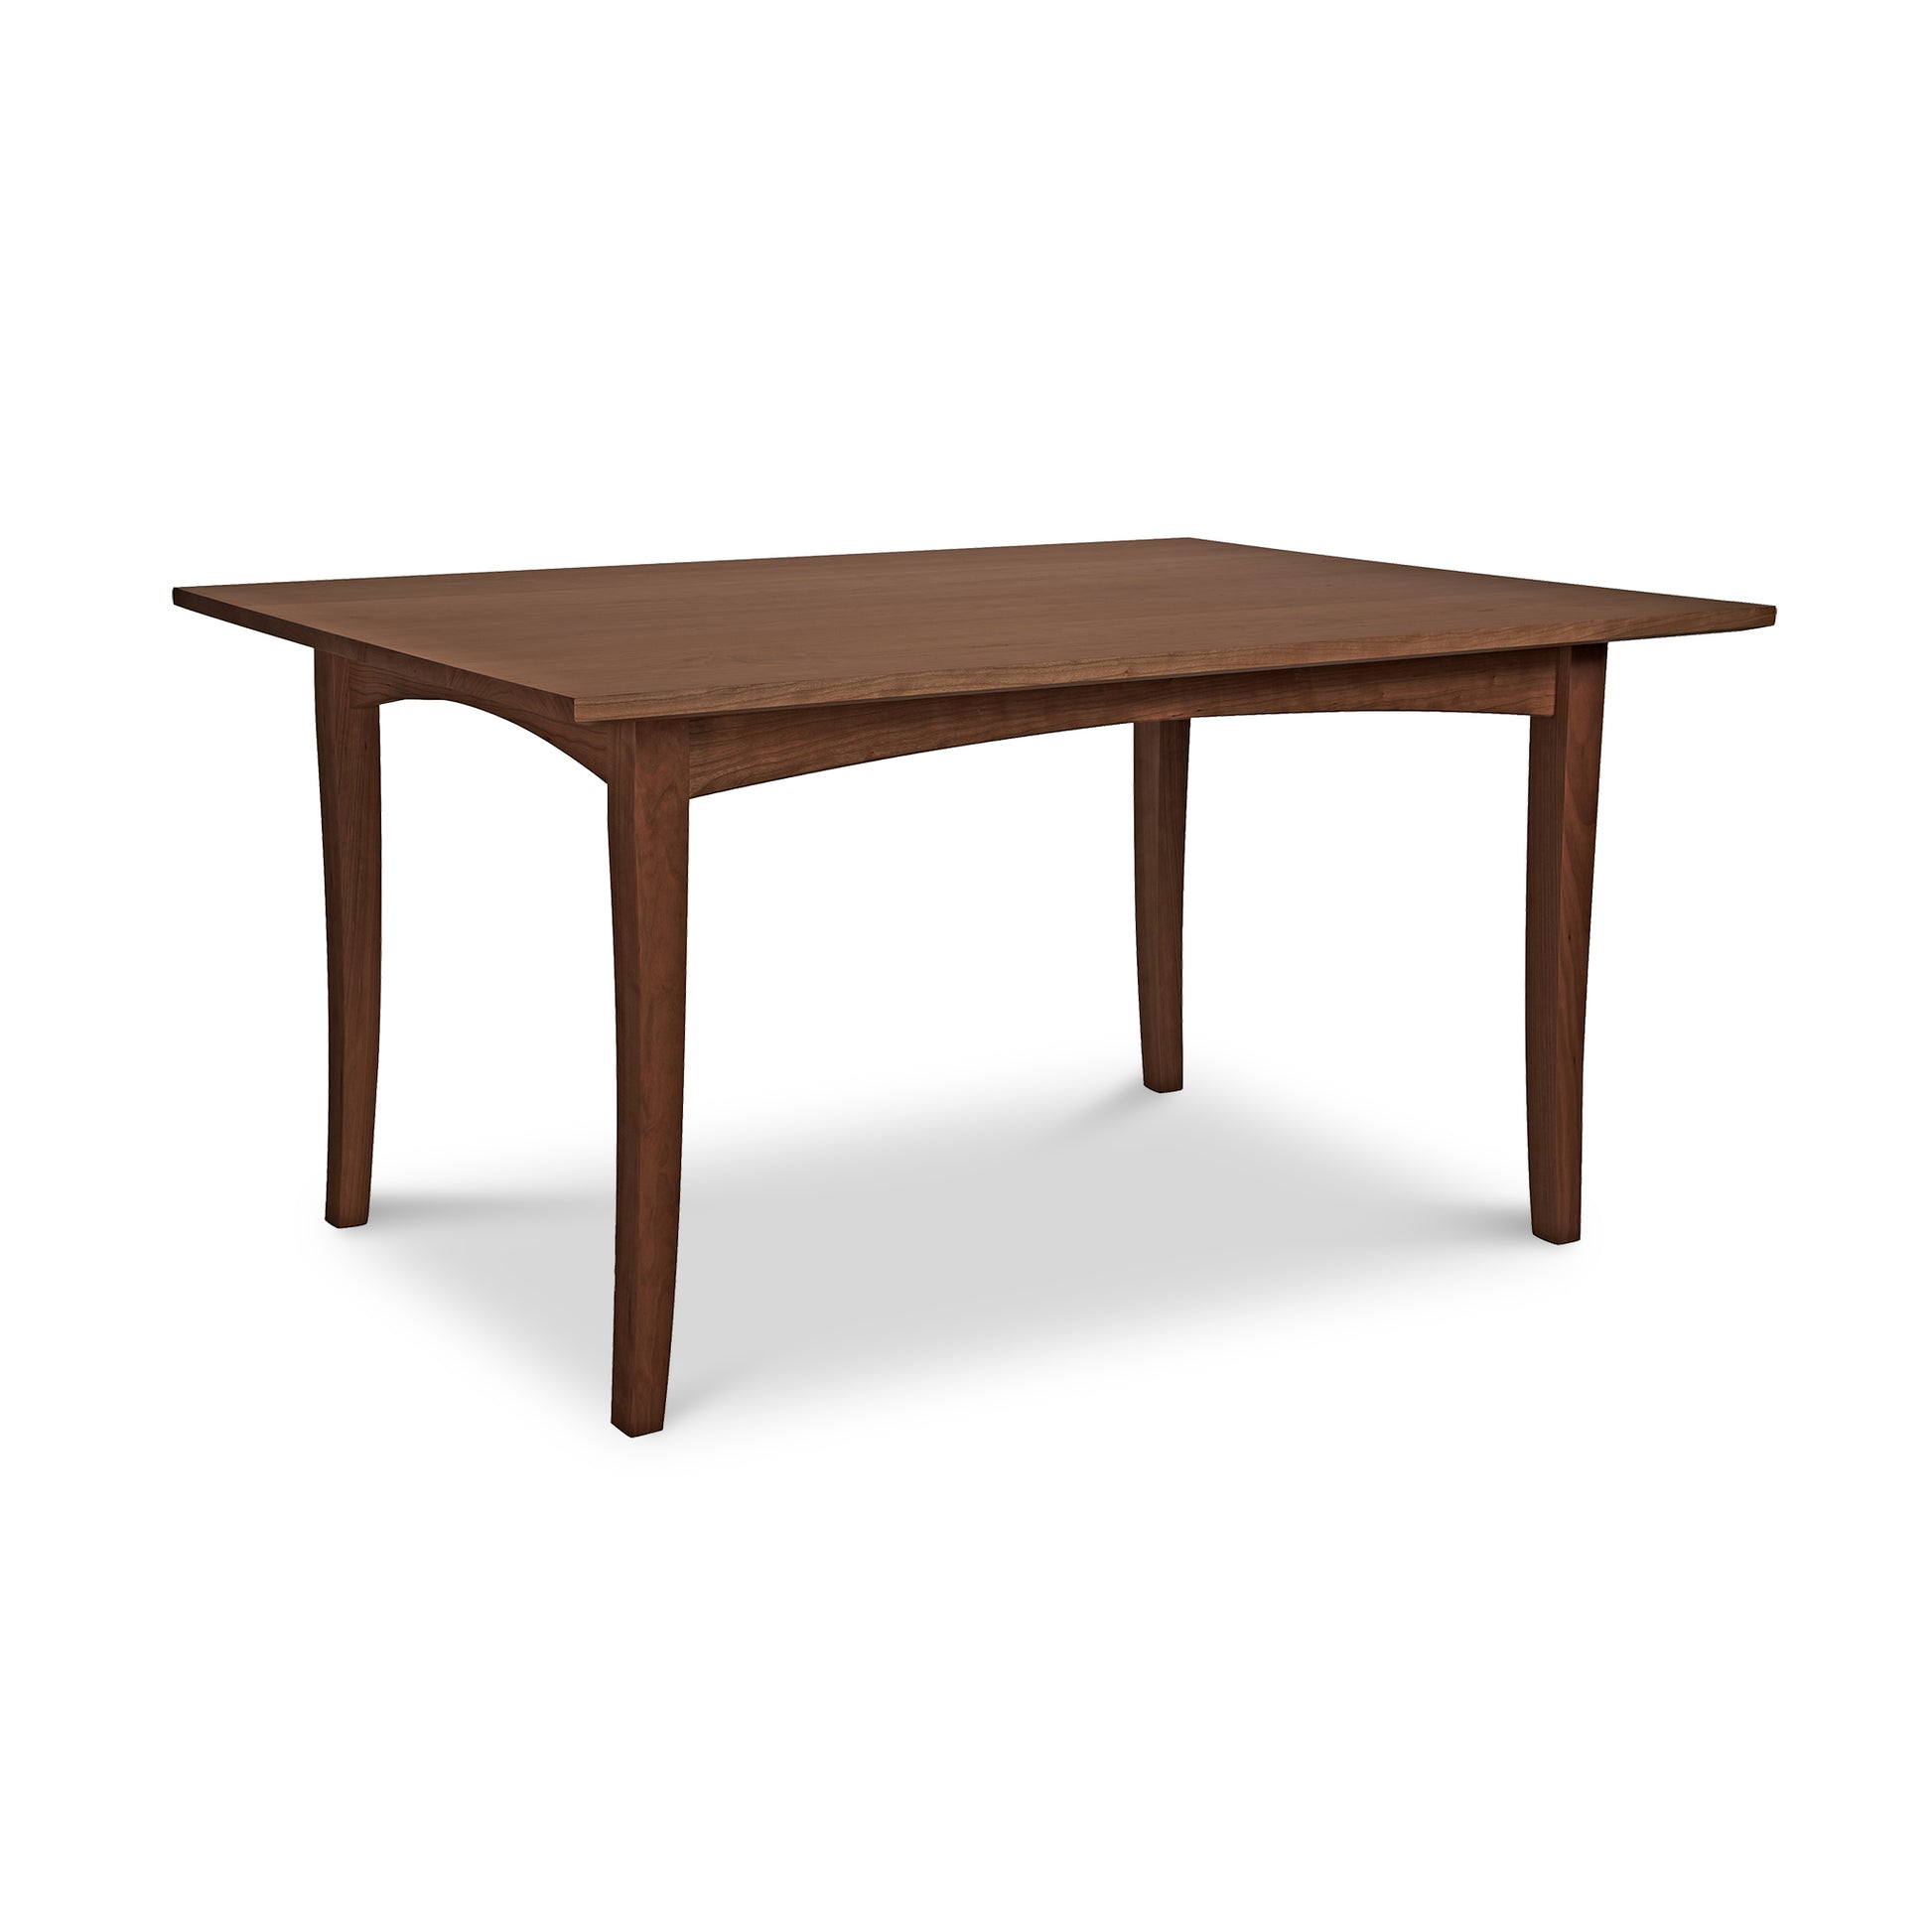 A Maple Corner Woodworks American Shaker Rectangular Solid Top Table with a hardwood top and legs.